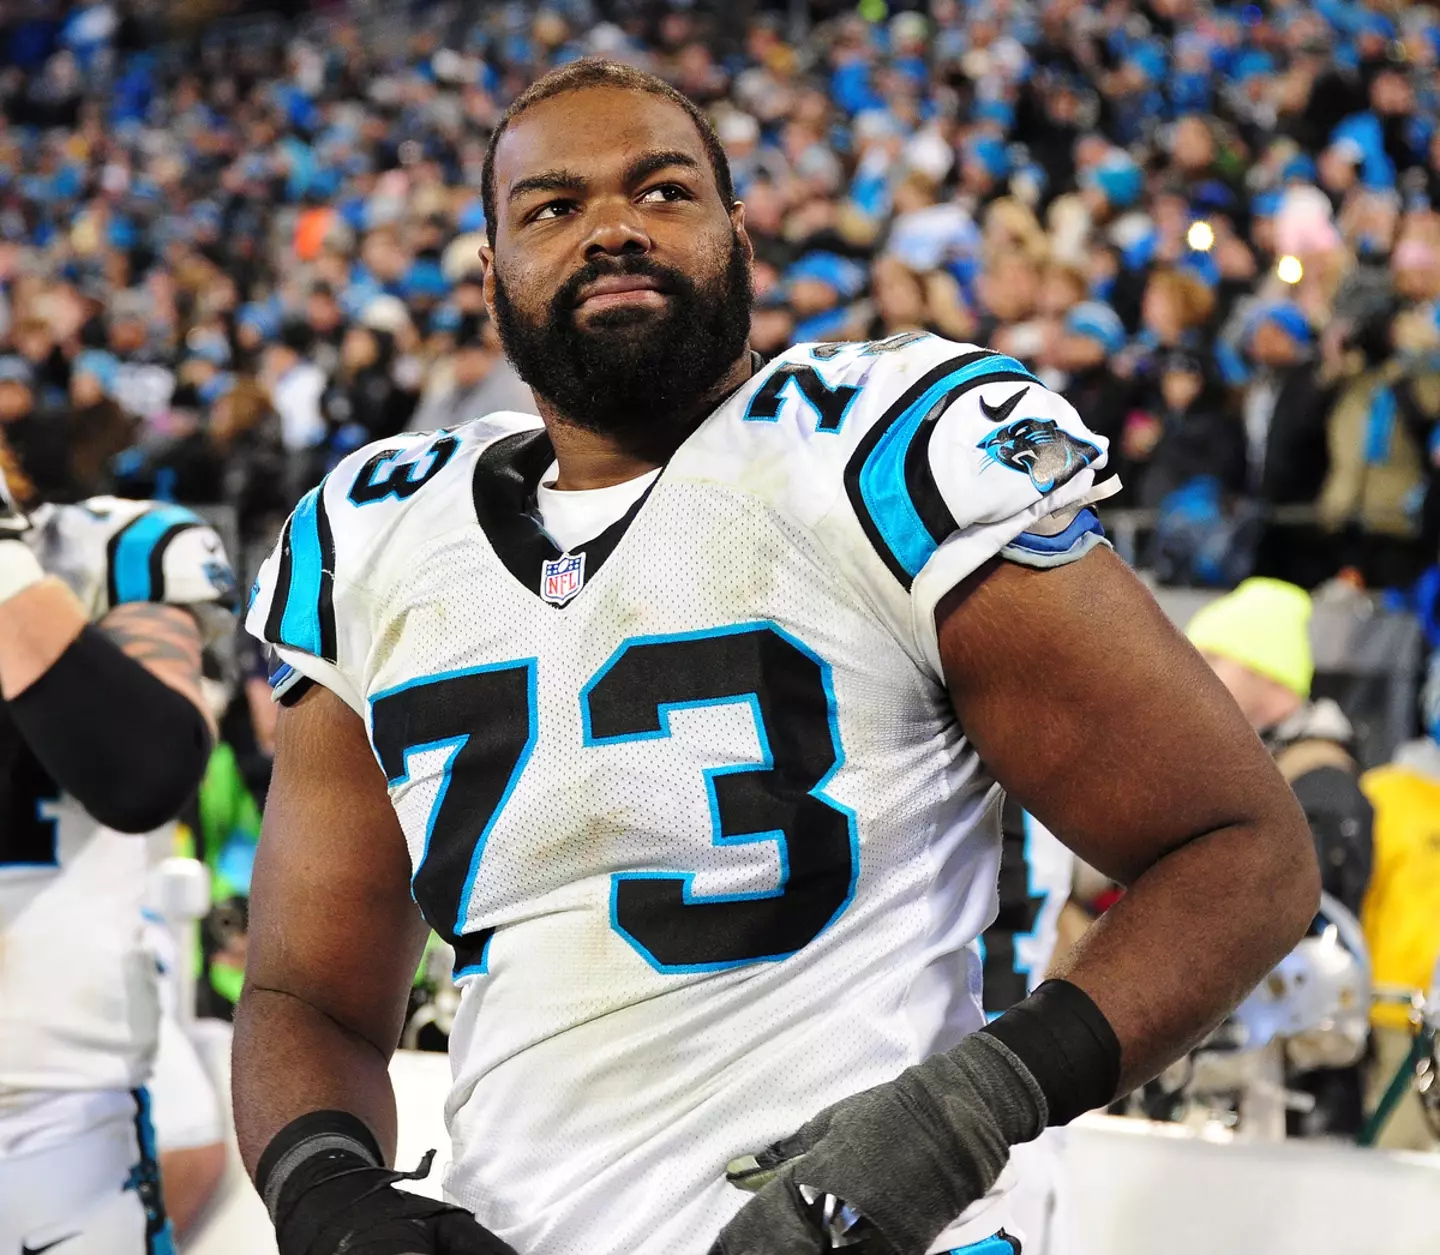 Oher has filed a lawsuit against the Tuohy family.